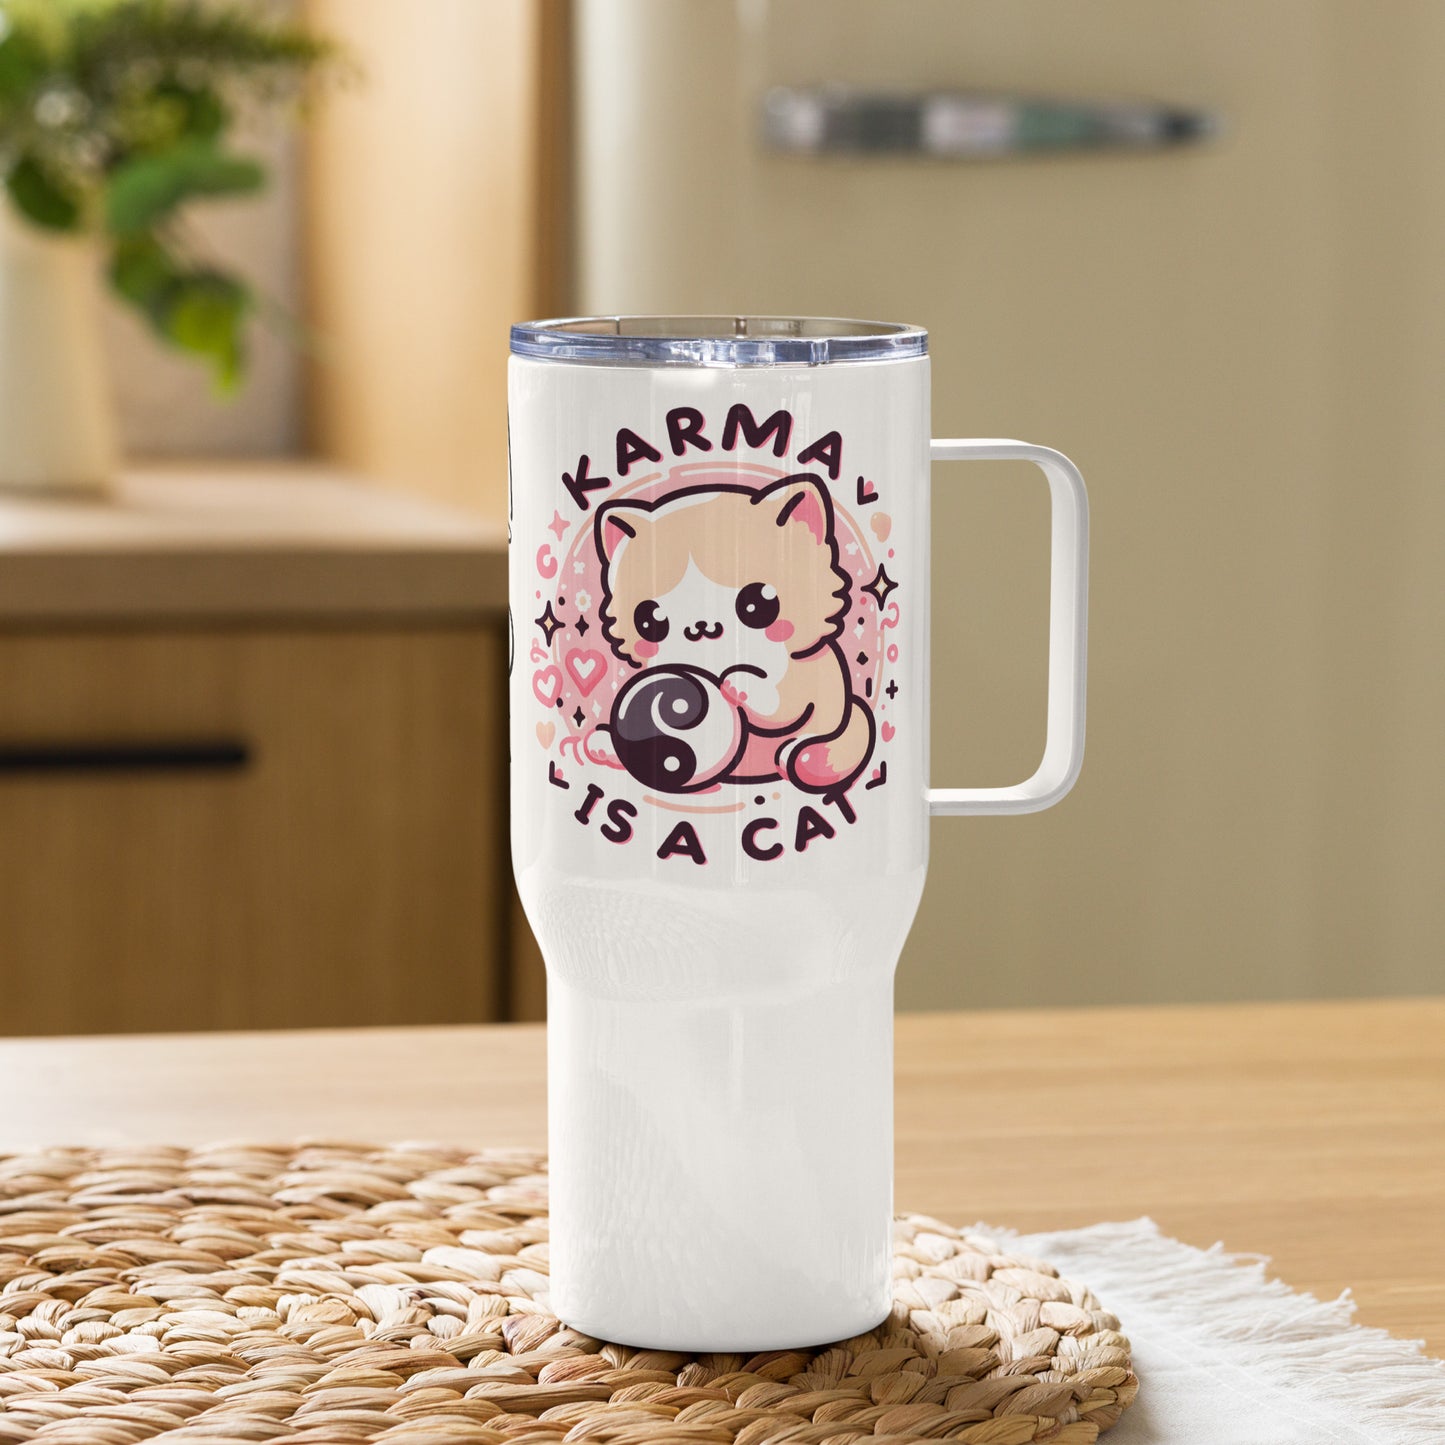 Karma Cat - Taylor Swift 'Midnights' Inspired Travel Mug with Handle - Music Era Collectible & Gift